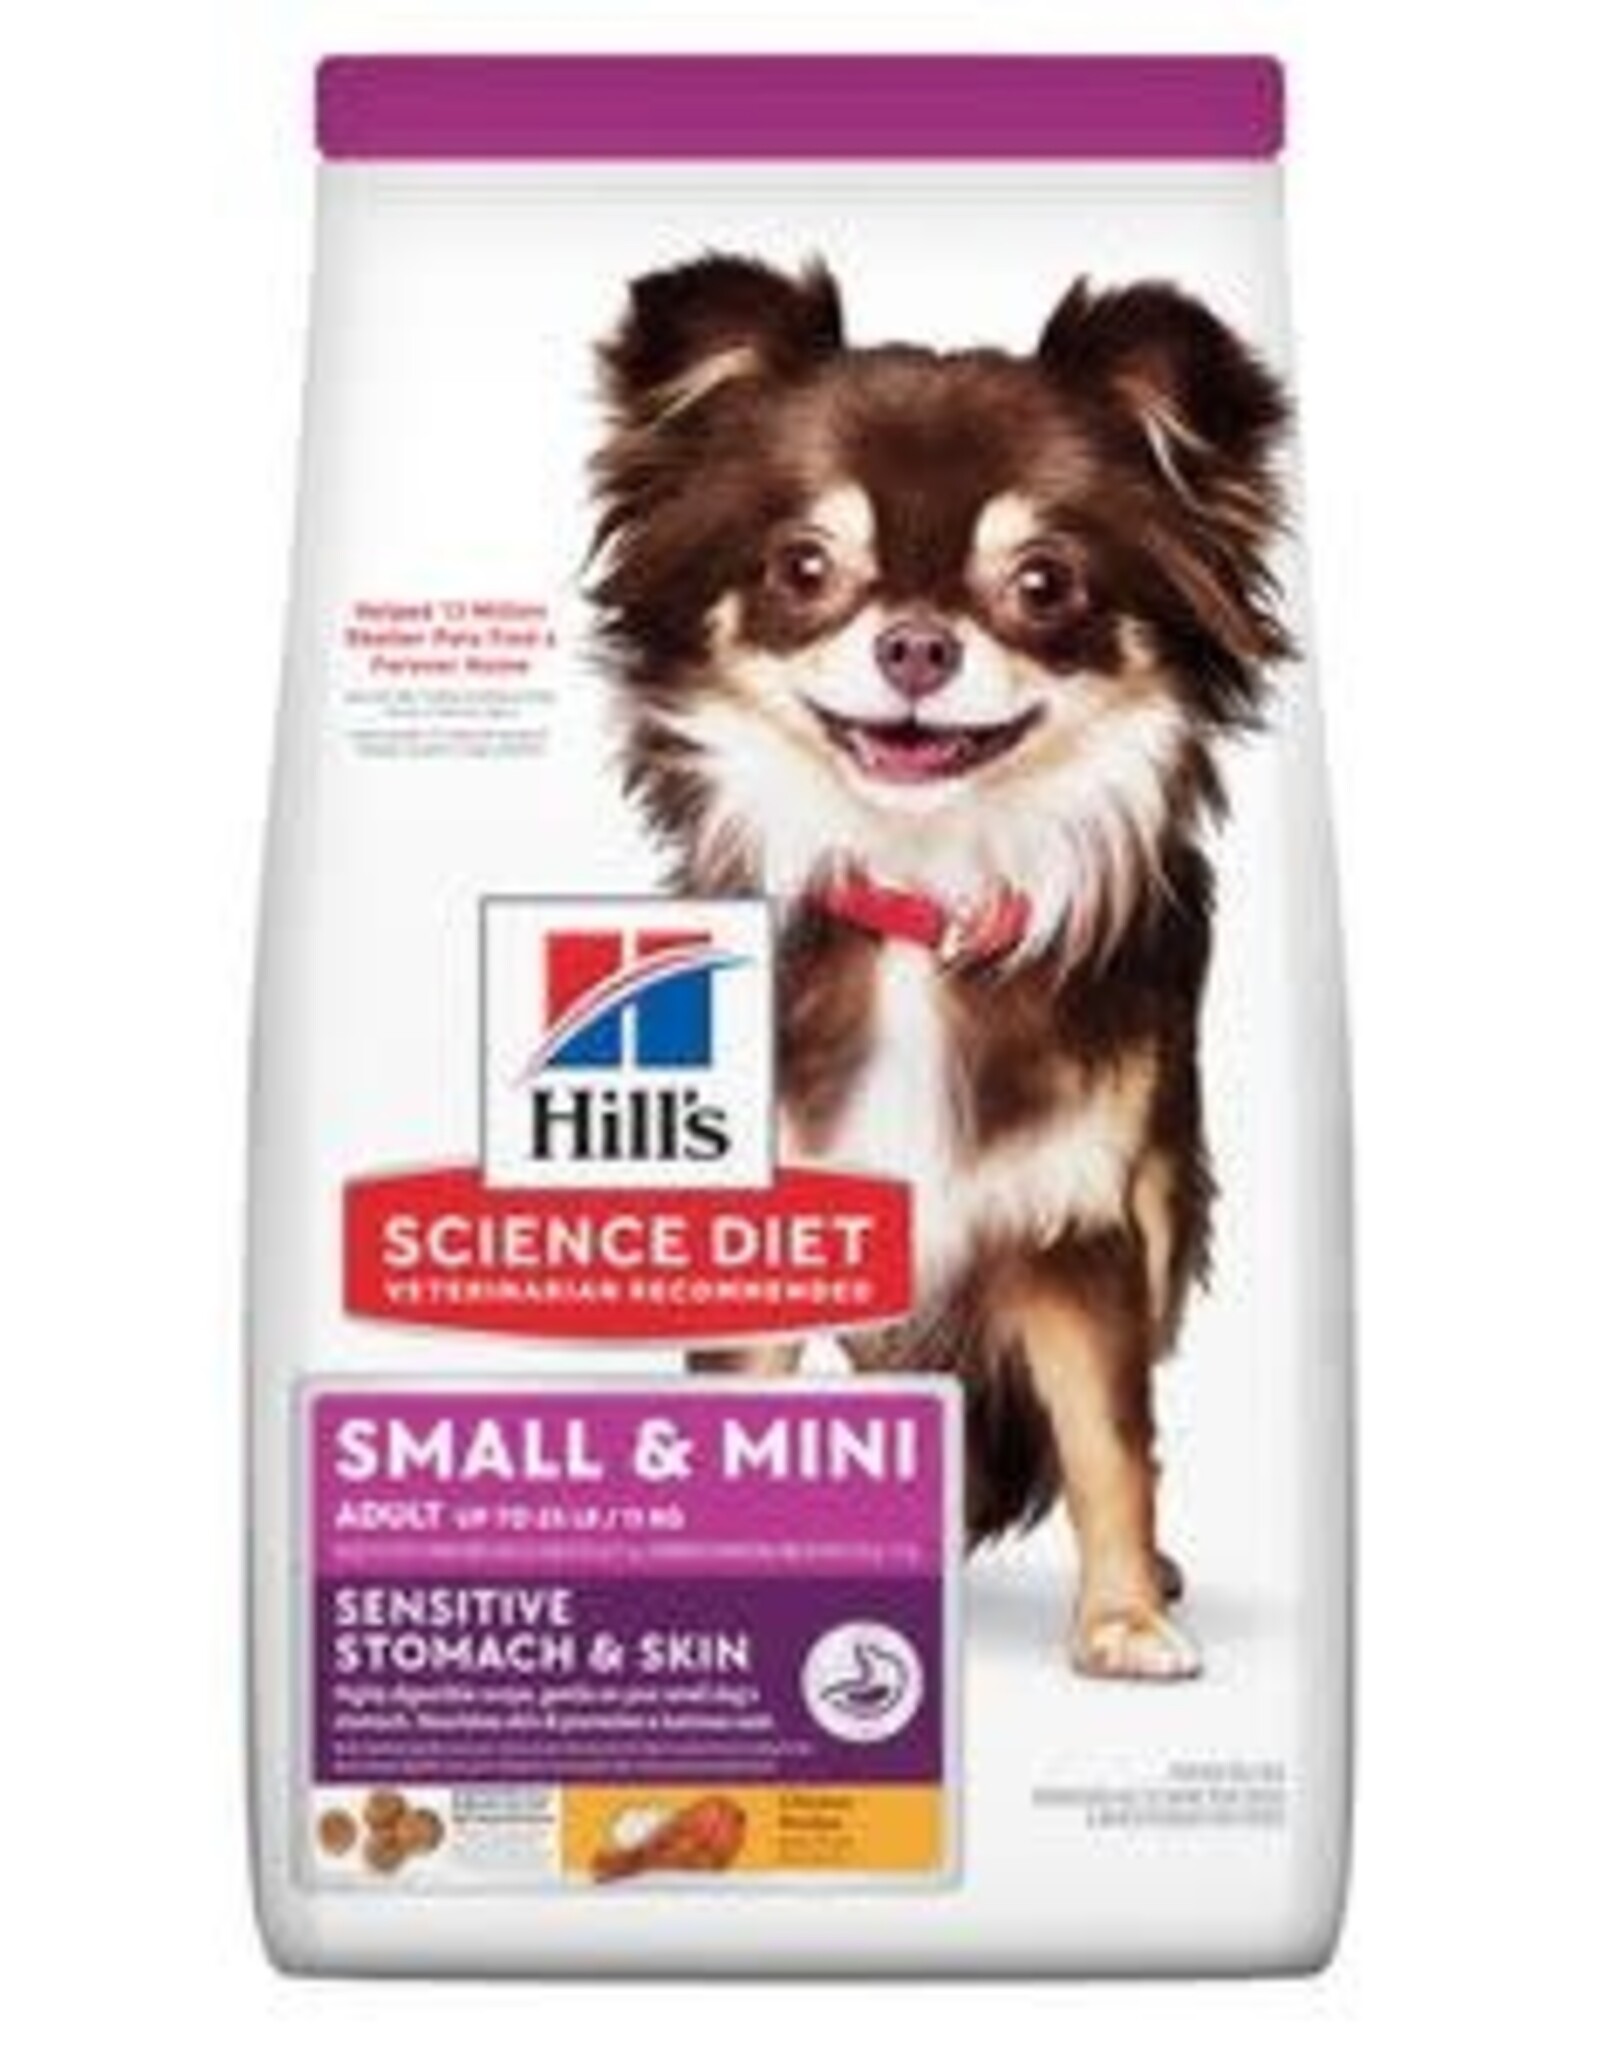 SCIENCE DIET HILL'S SCIENCE DIET CANINE SENSITIVE STOMACH & SKIN SMALL & MINI ADULT 15LBS